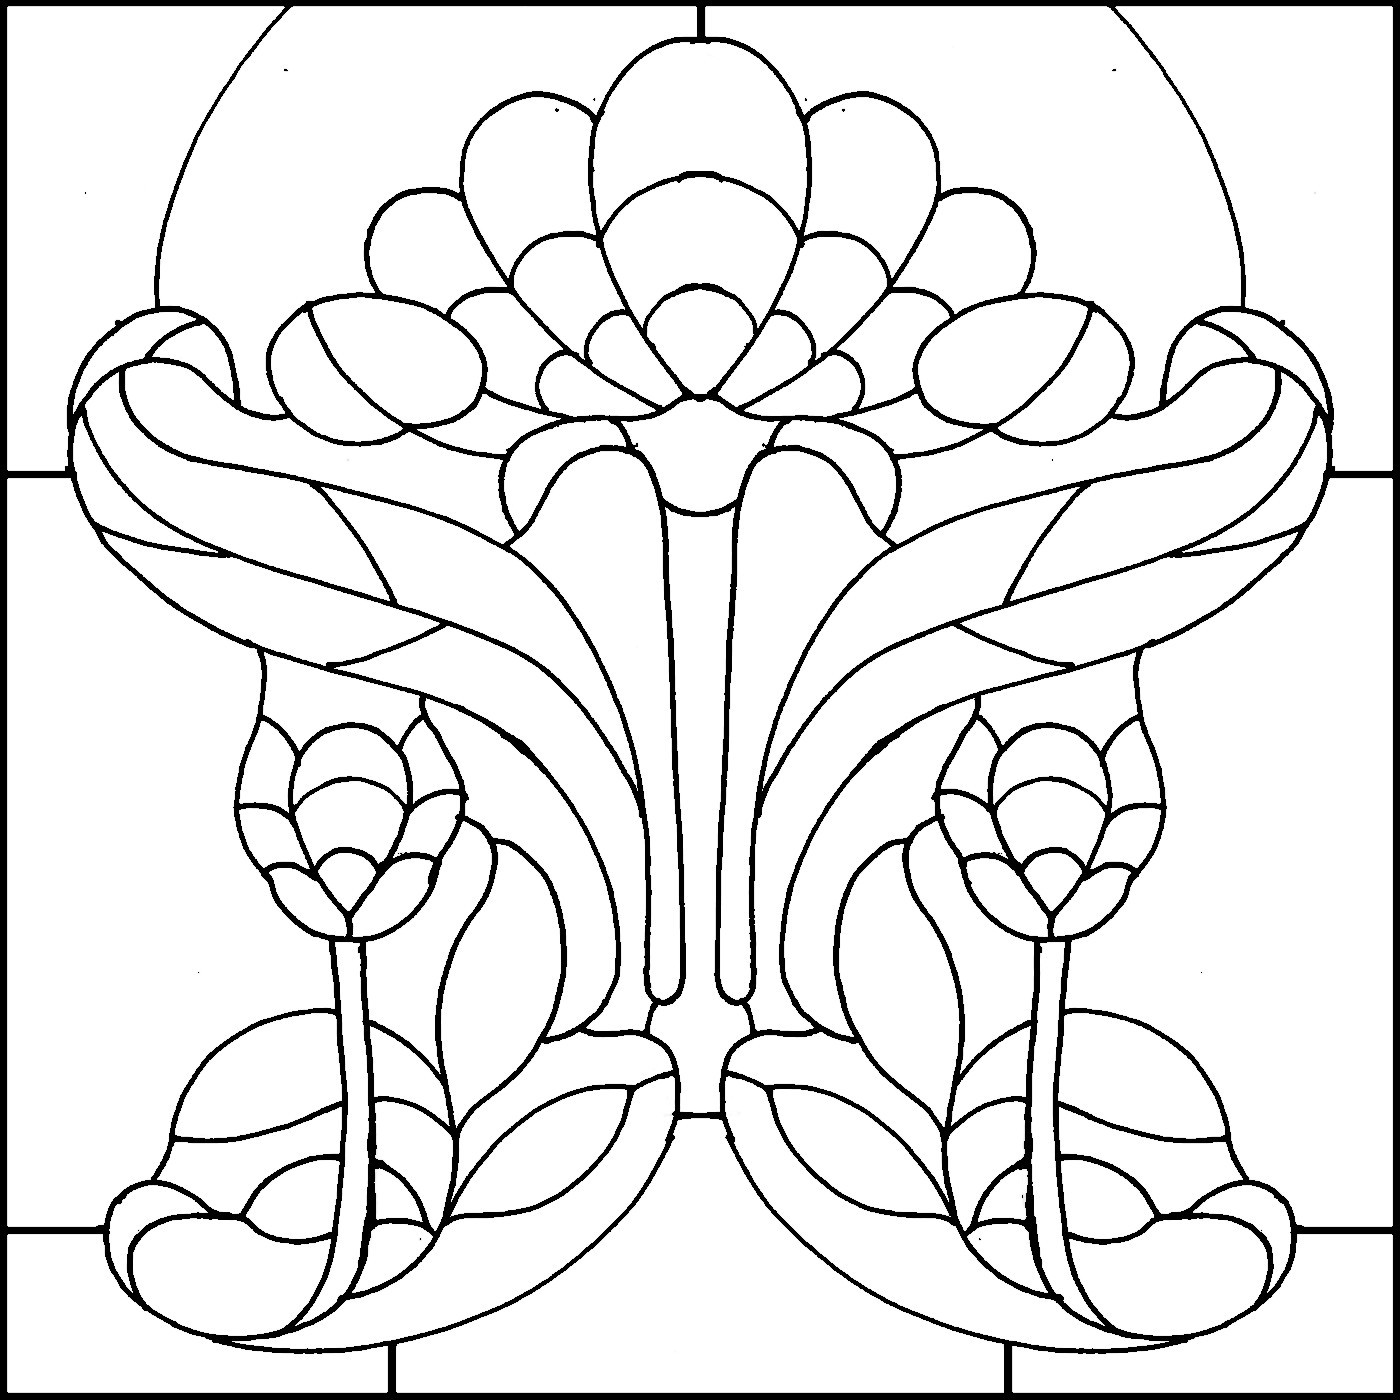 Georgia O Keeffe Coloring Pages At GetColorings Free Printable Colorings Pages To Print